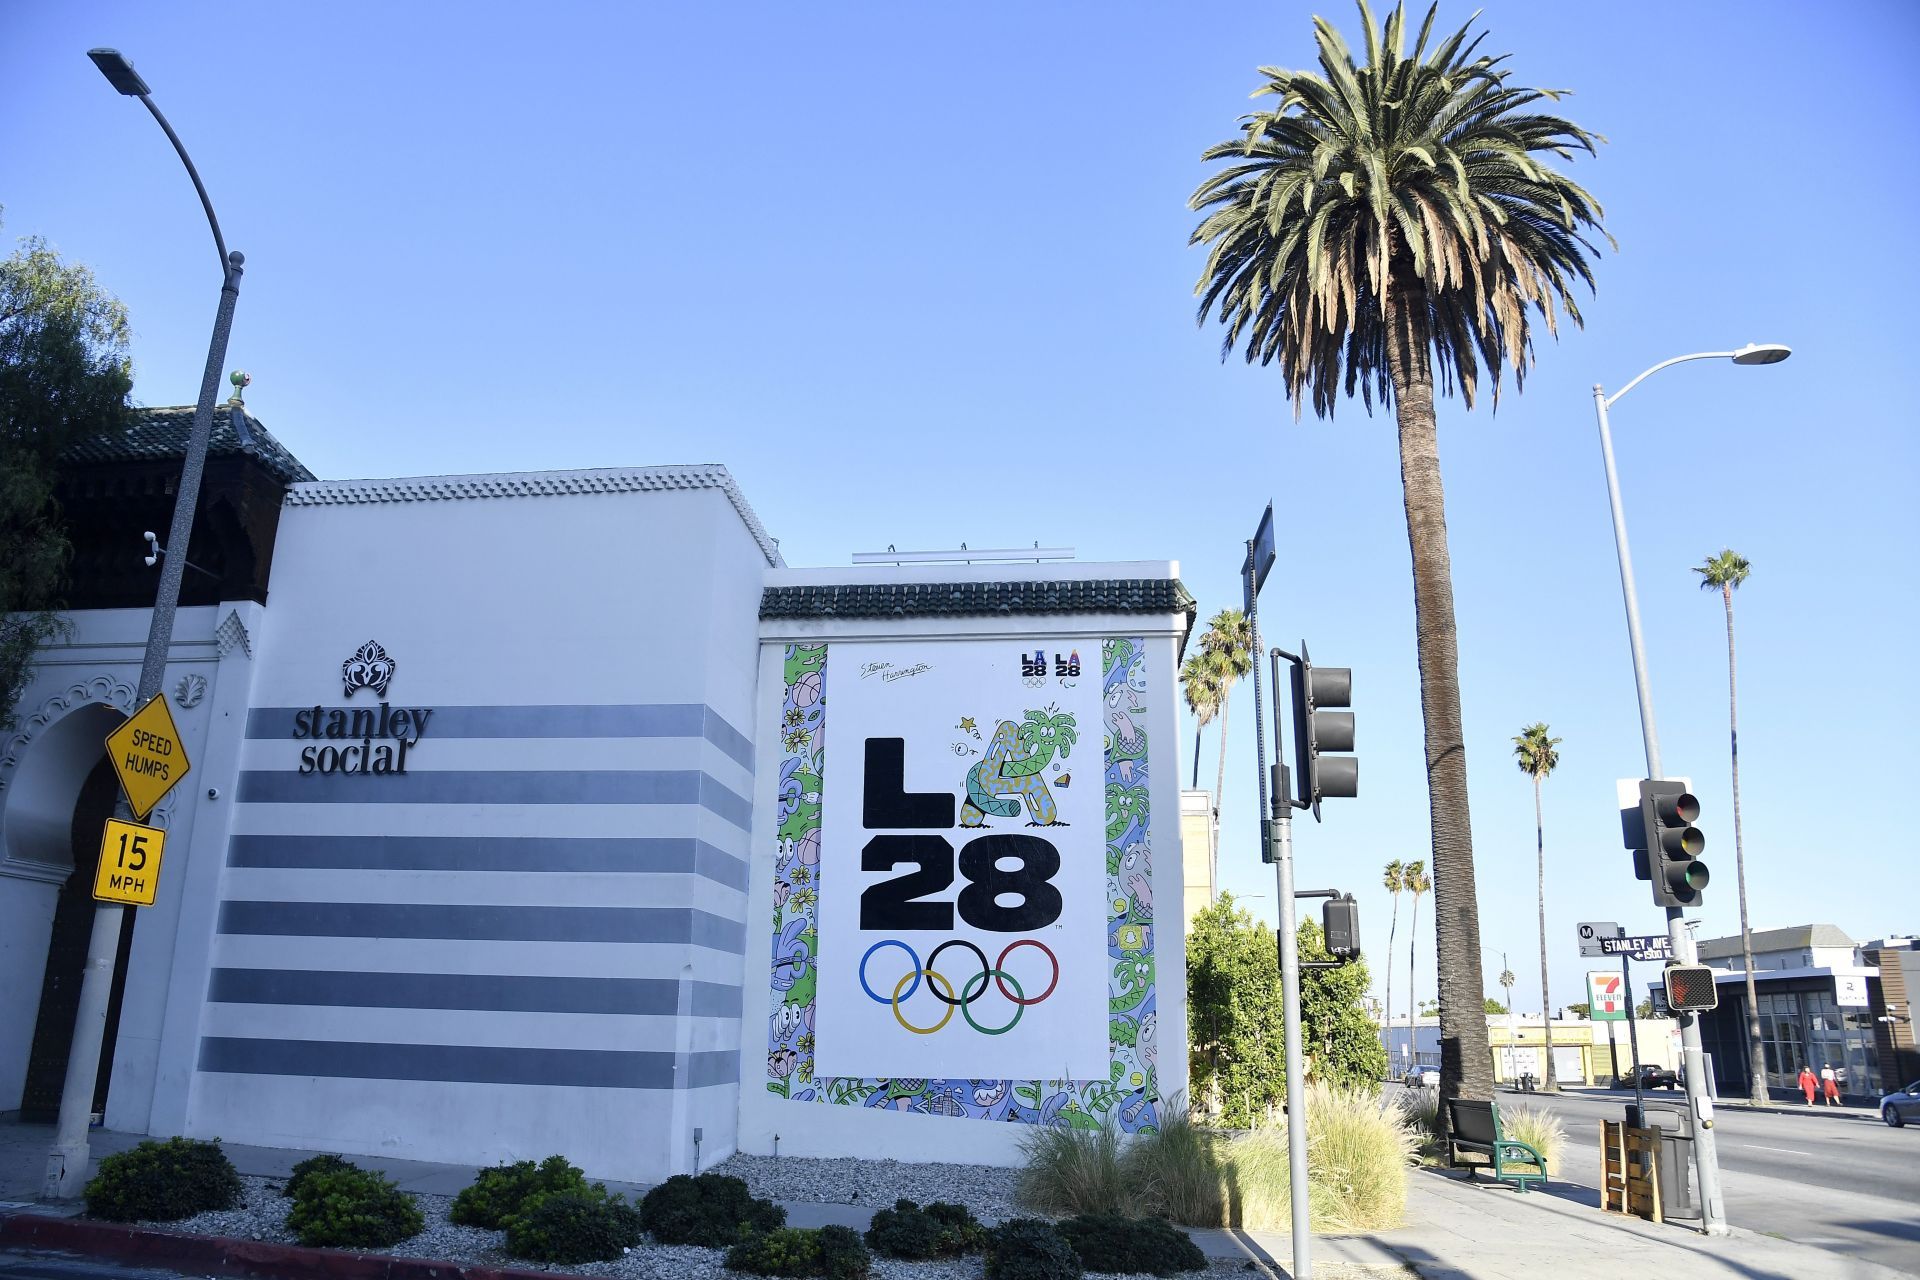 The LA28 Olympic mural by artist Steven Harrington. Pic: Getty Images